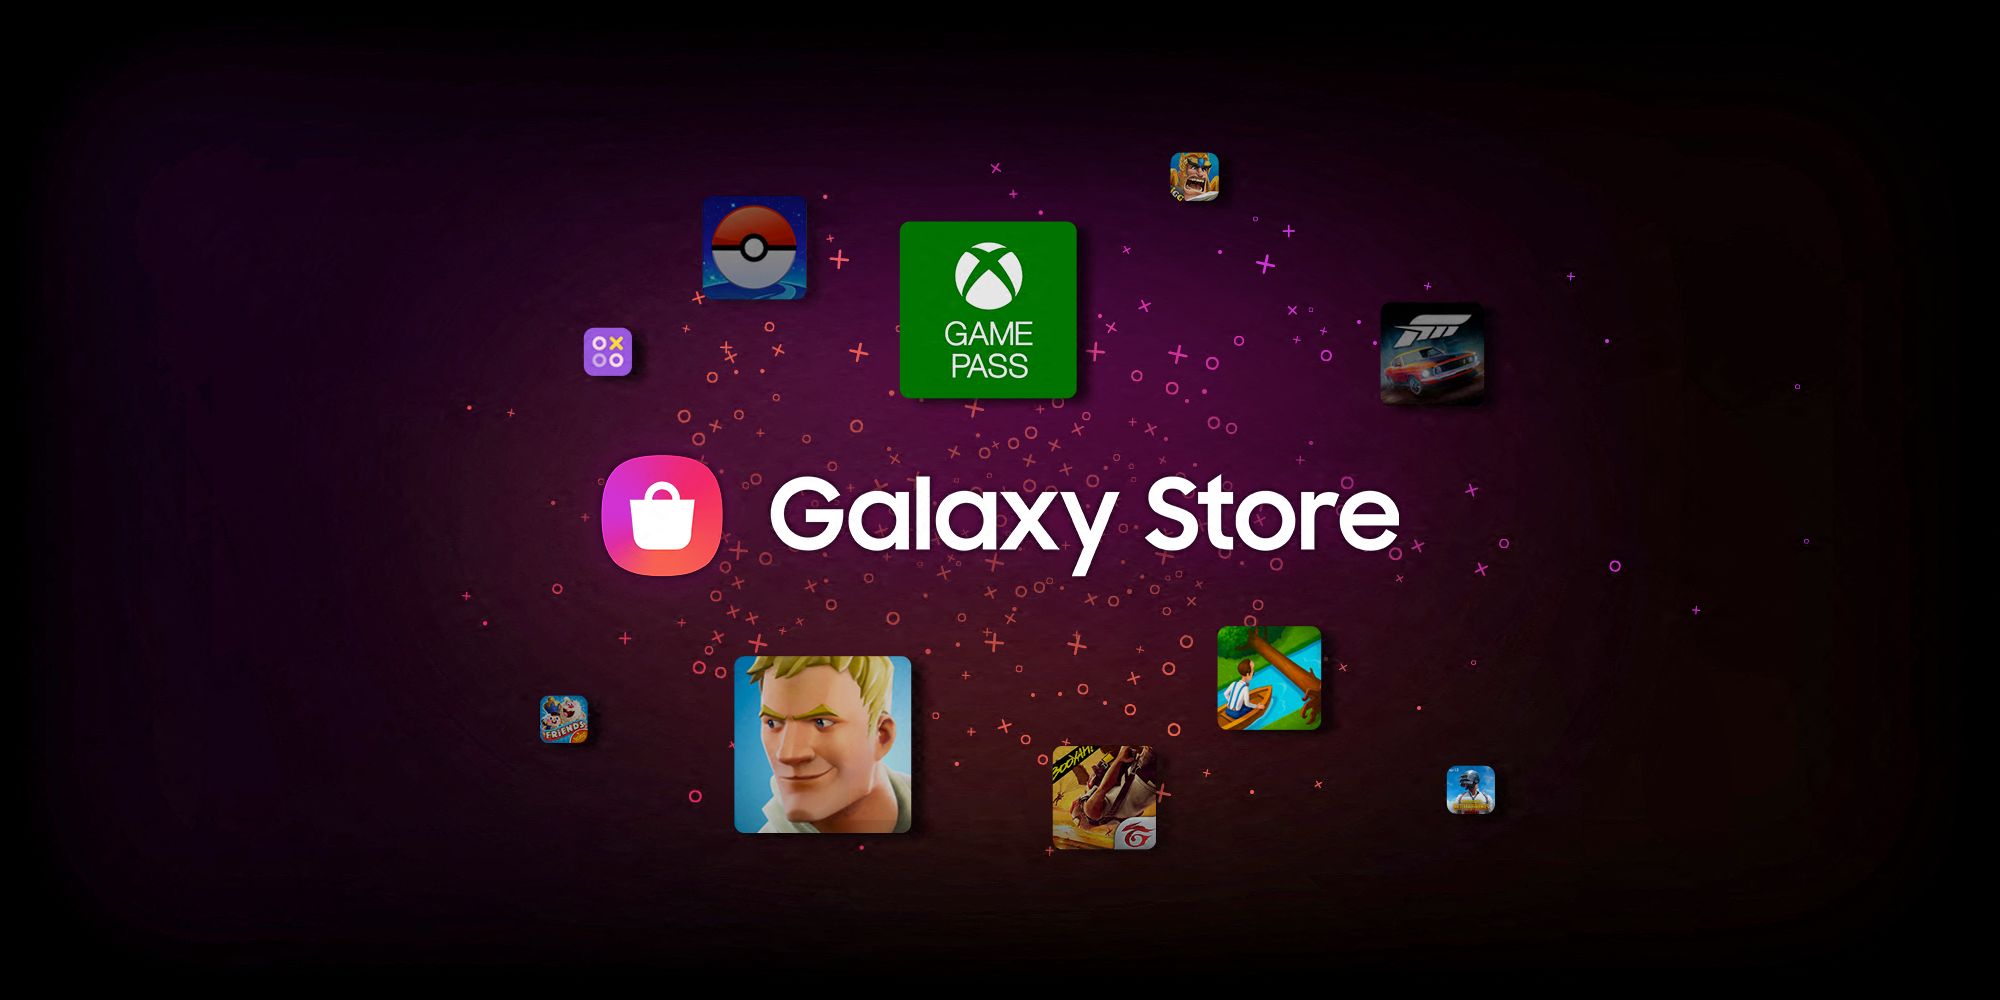 The Galaxy Store logo with the logos of a number of games and game related apps such as Xbox Game Pass and Fortnite